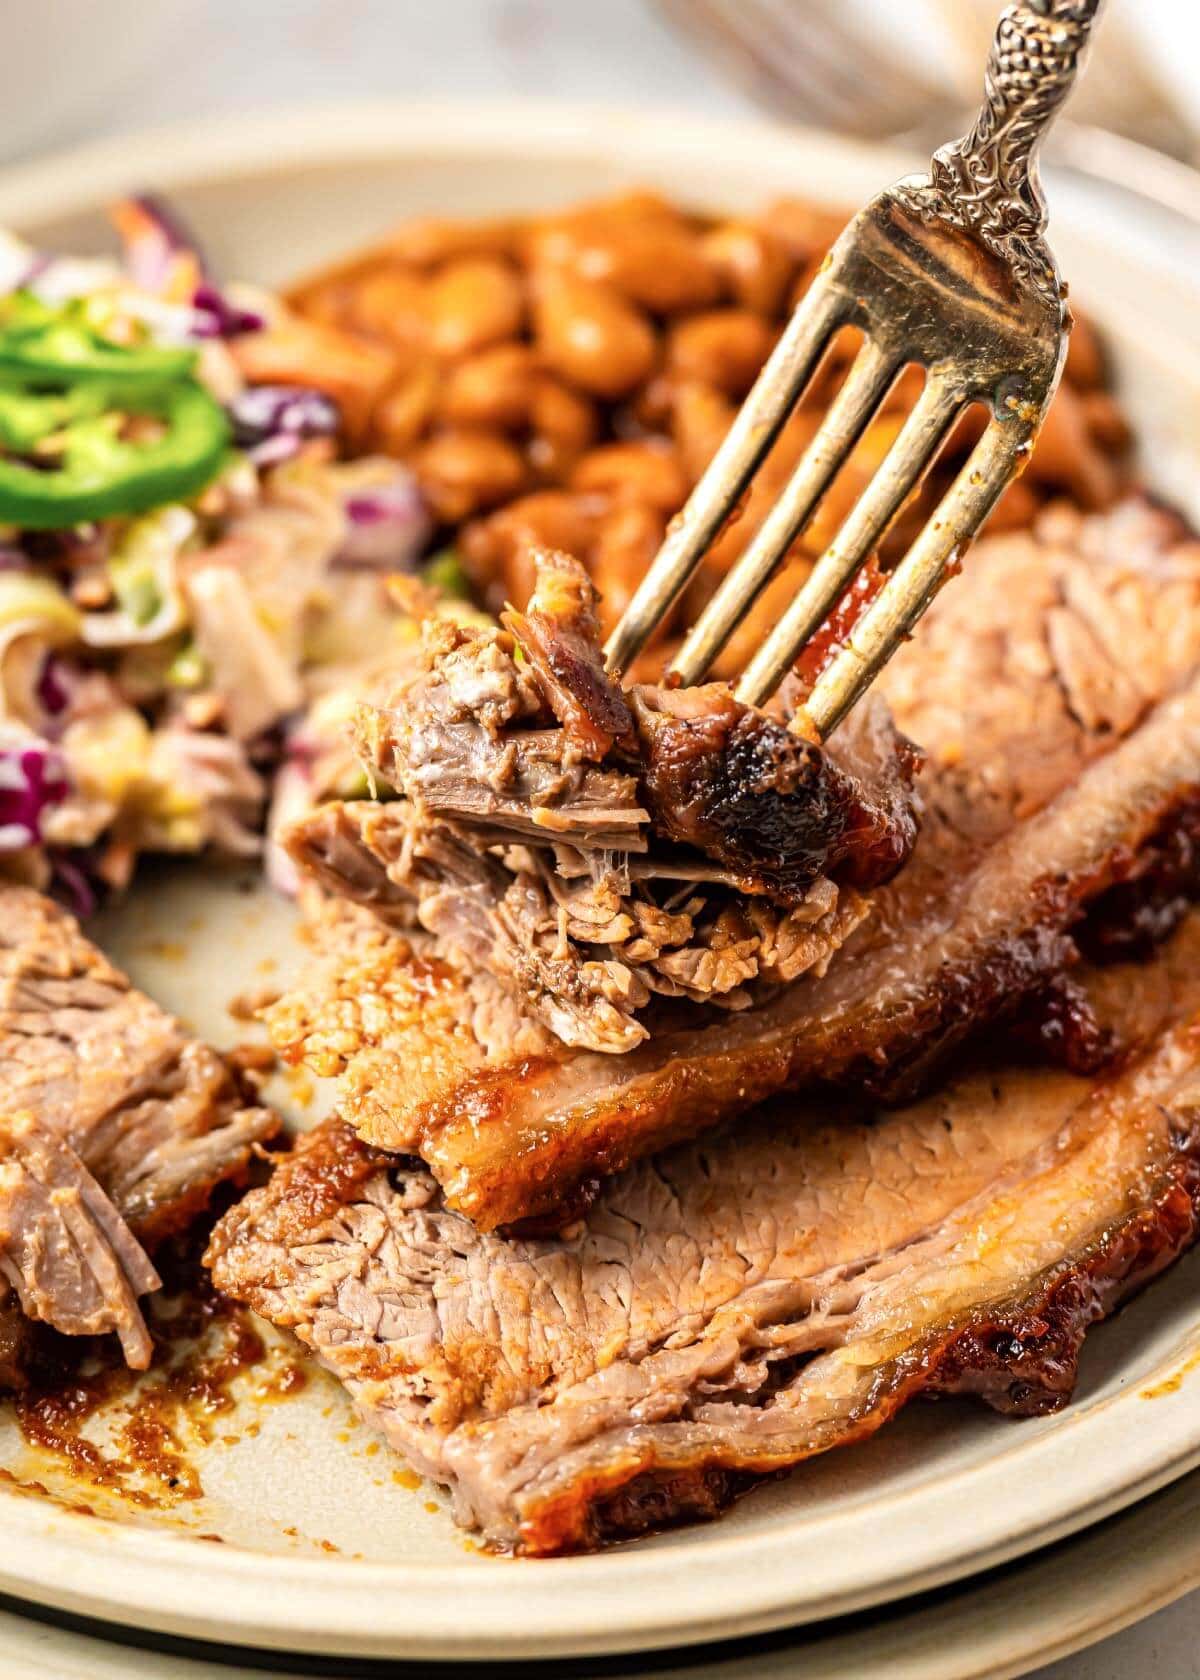 Brisket on a plate with beans and salad and fork.